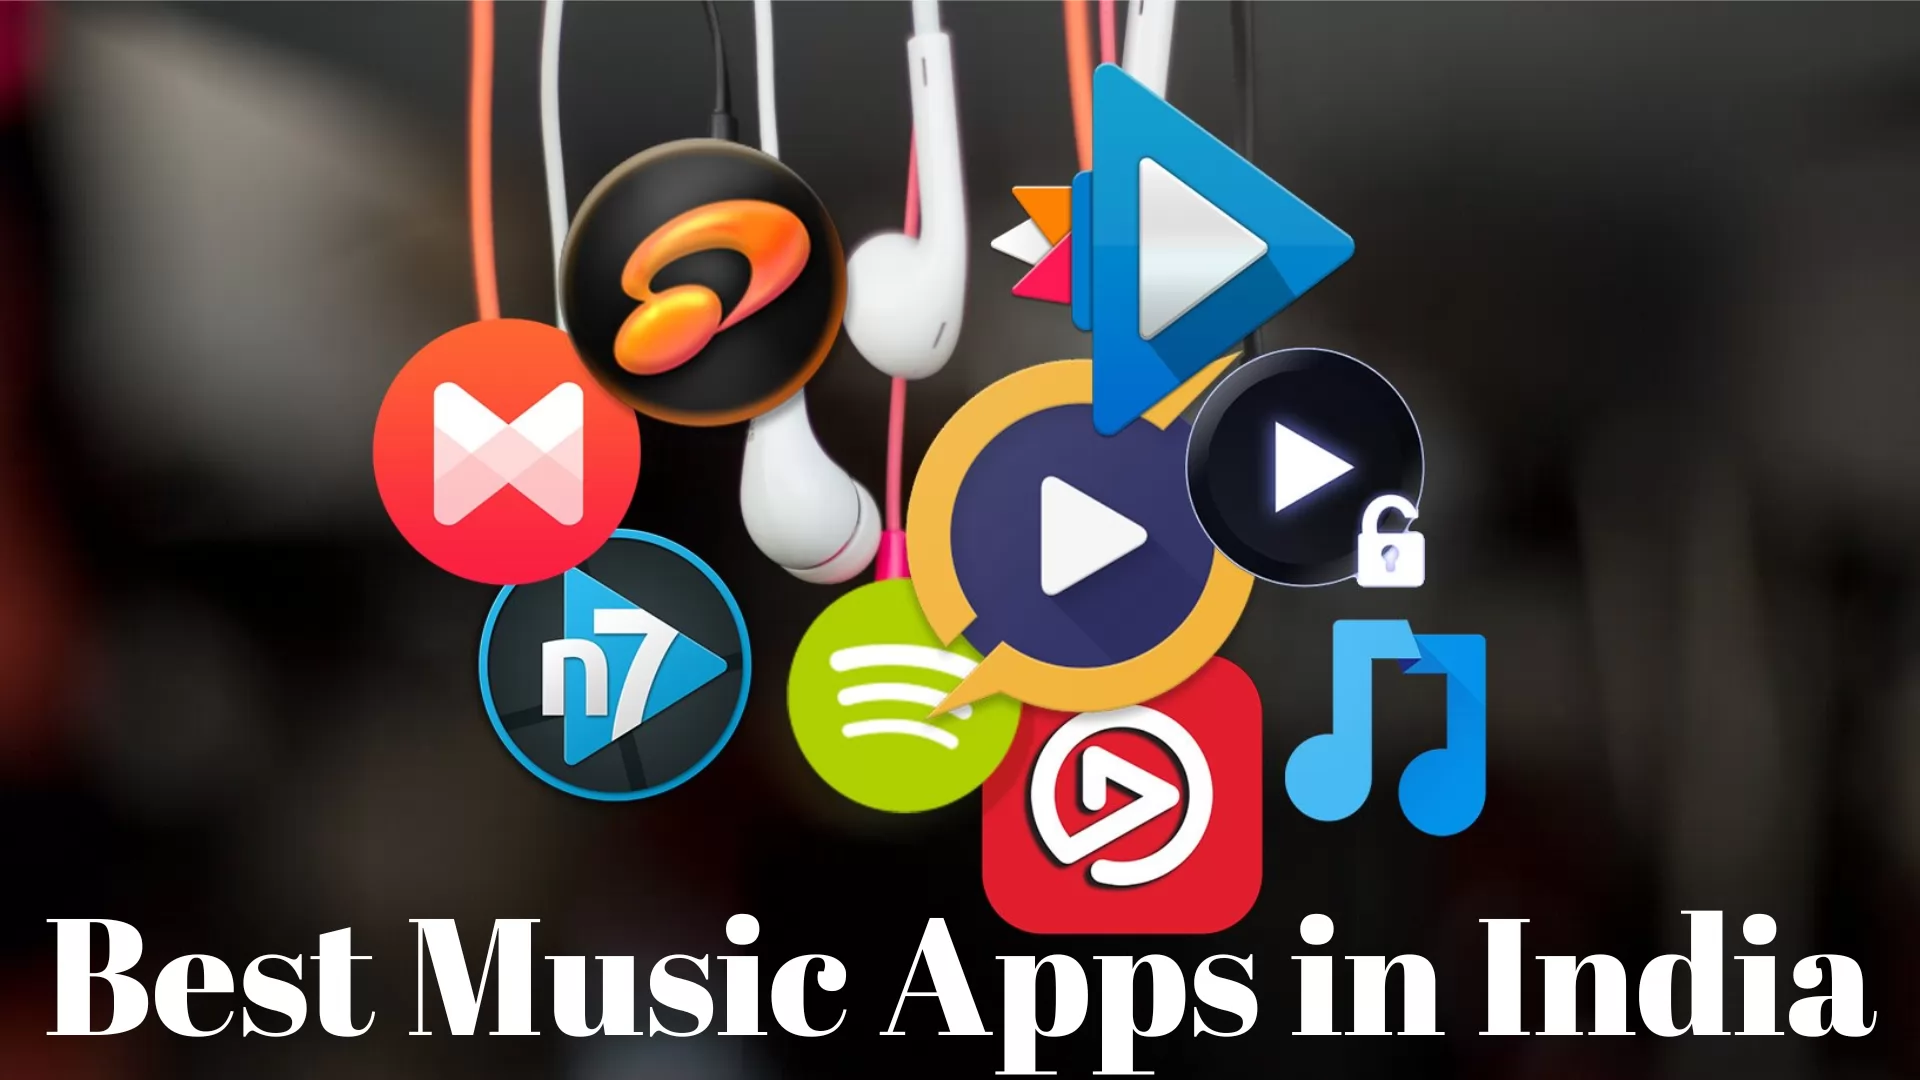 15 Best Music Apps in India To Enjoy Music